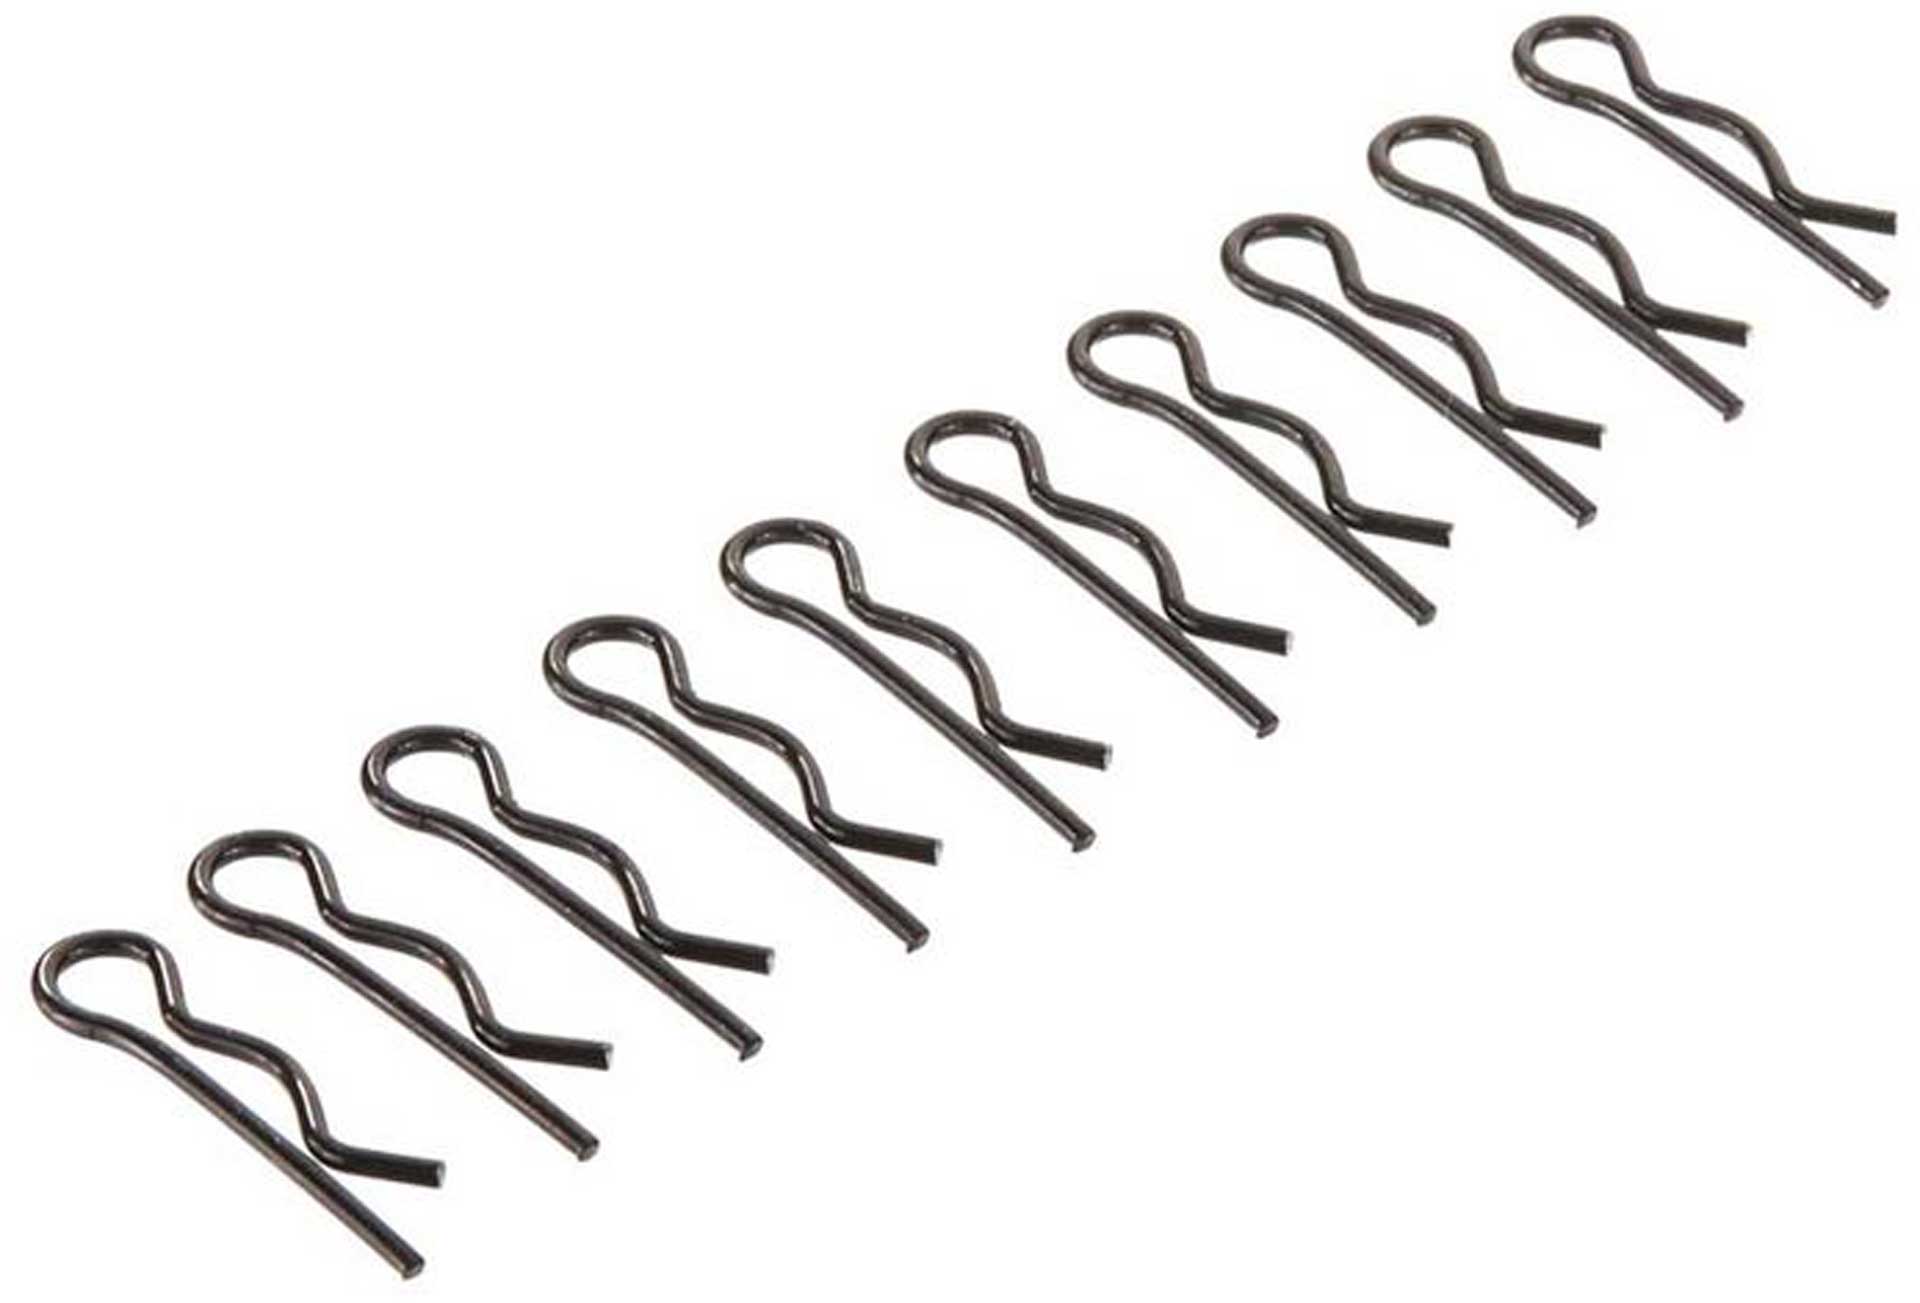 AXIAL AX31231 Body Clips 8mm (10)